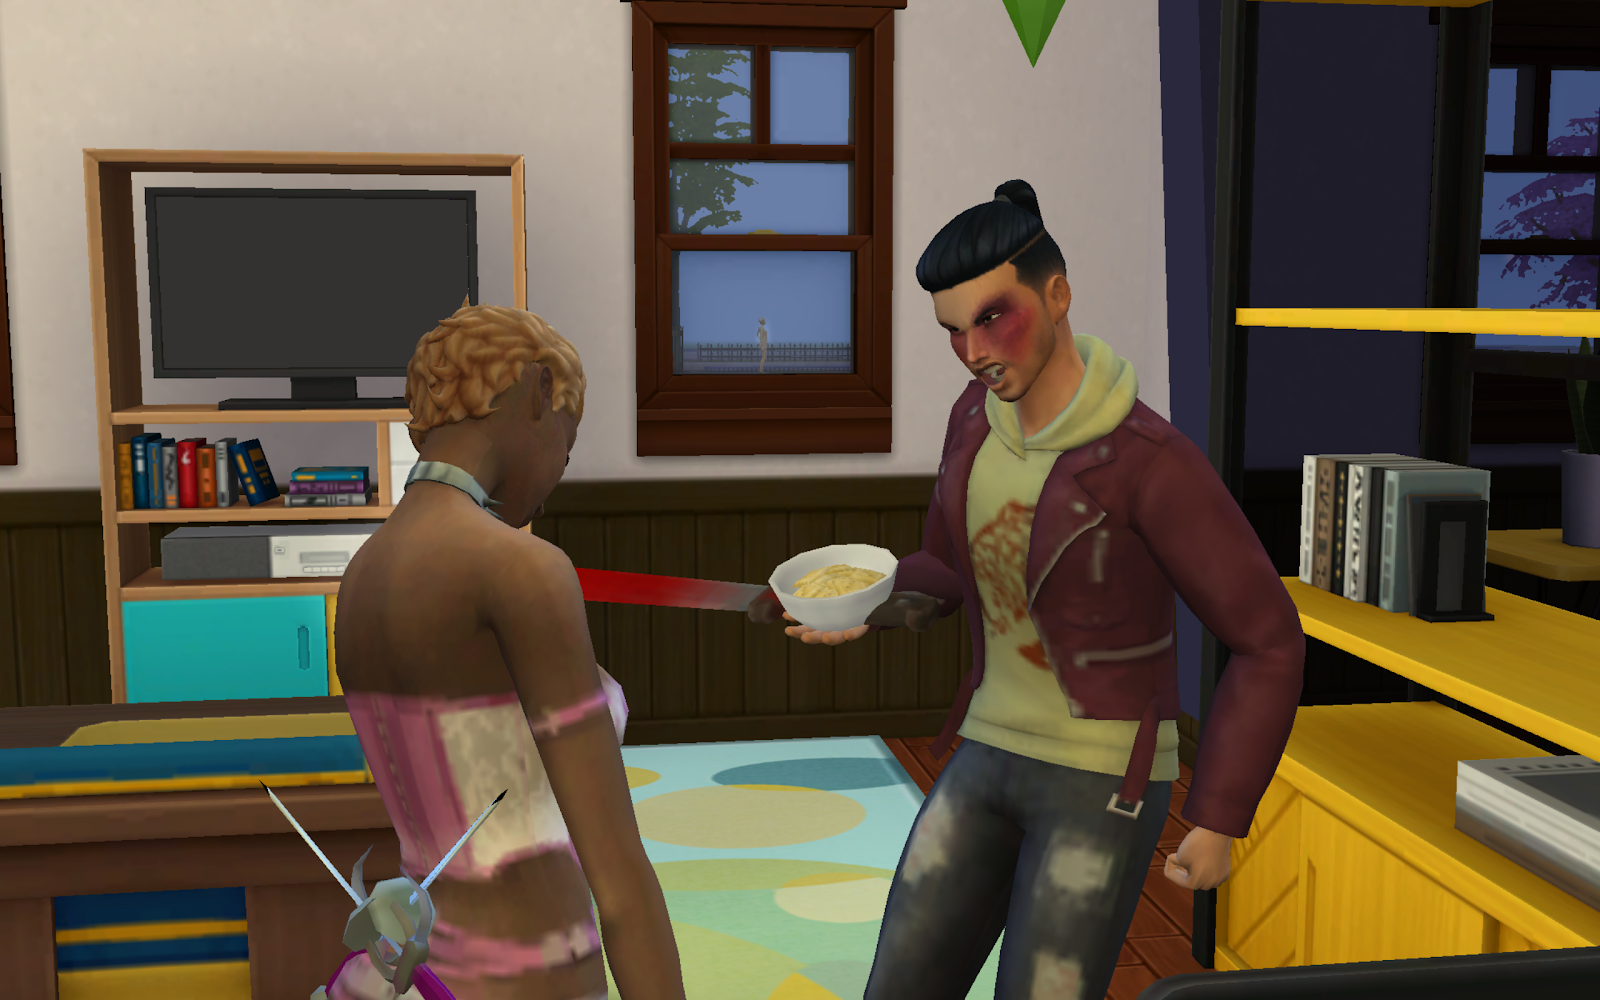 The Sims 4 Nihilistic Violence Mod Is Less Fun Than It Sounds